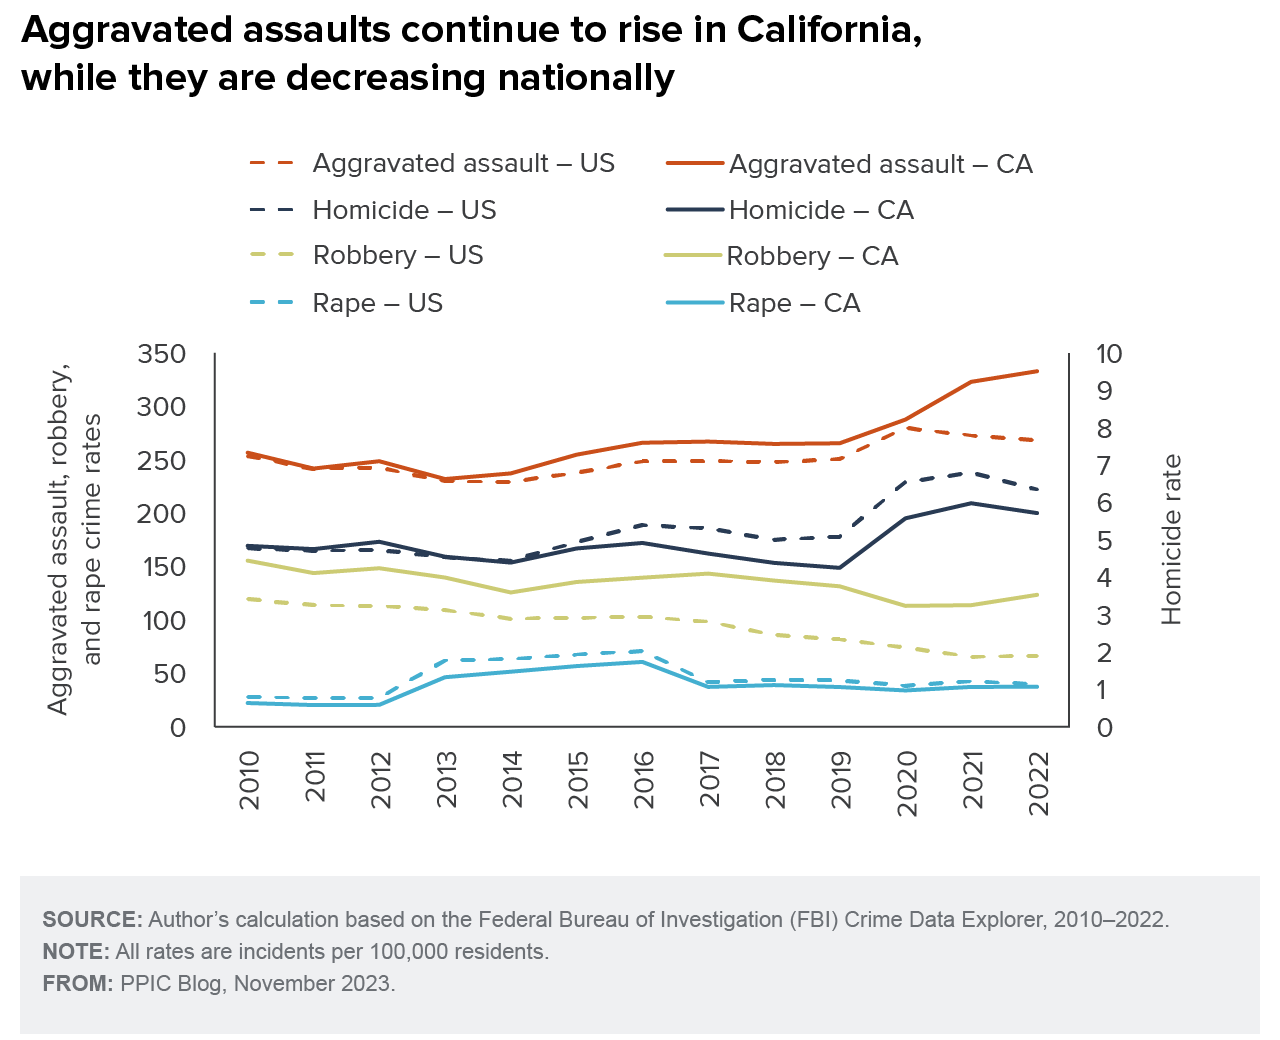 figure - Aggravated assaults continue to rise in California, while they are decreasing nationally